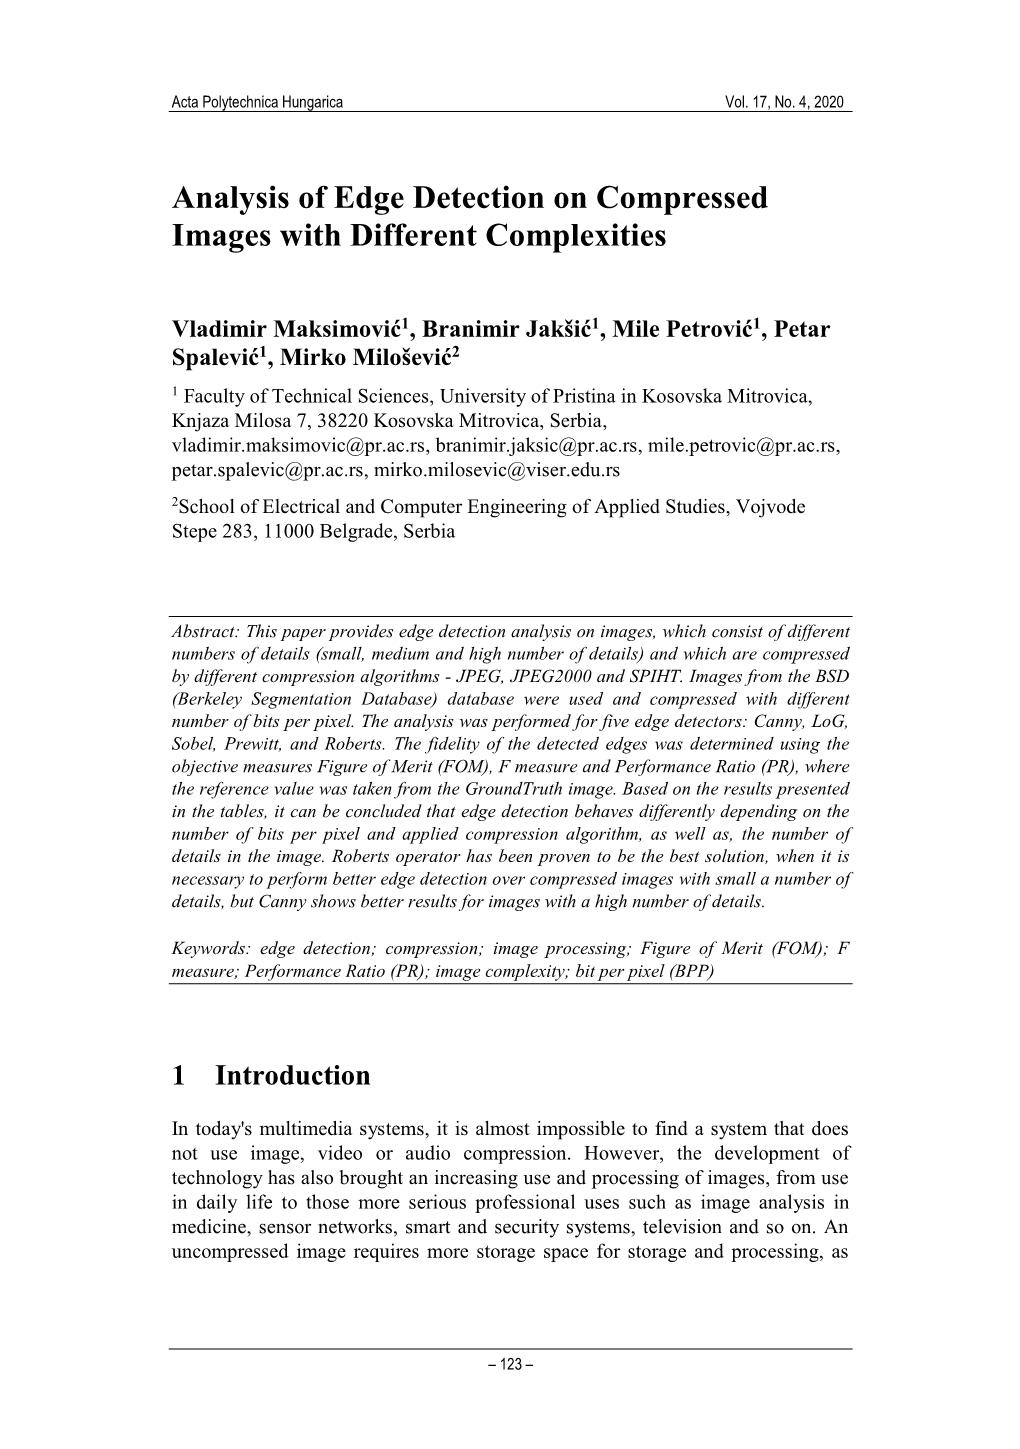 Analysis of Edge Detection on Compressed Images with Different Complexities